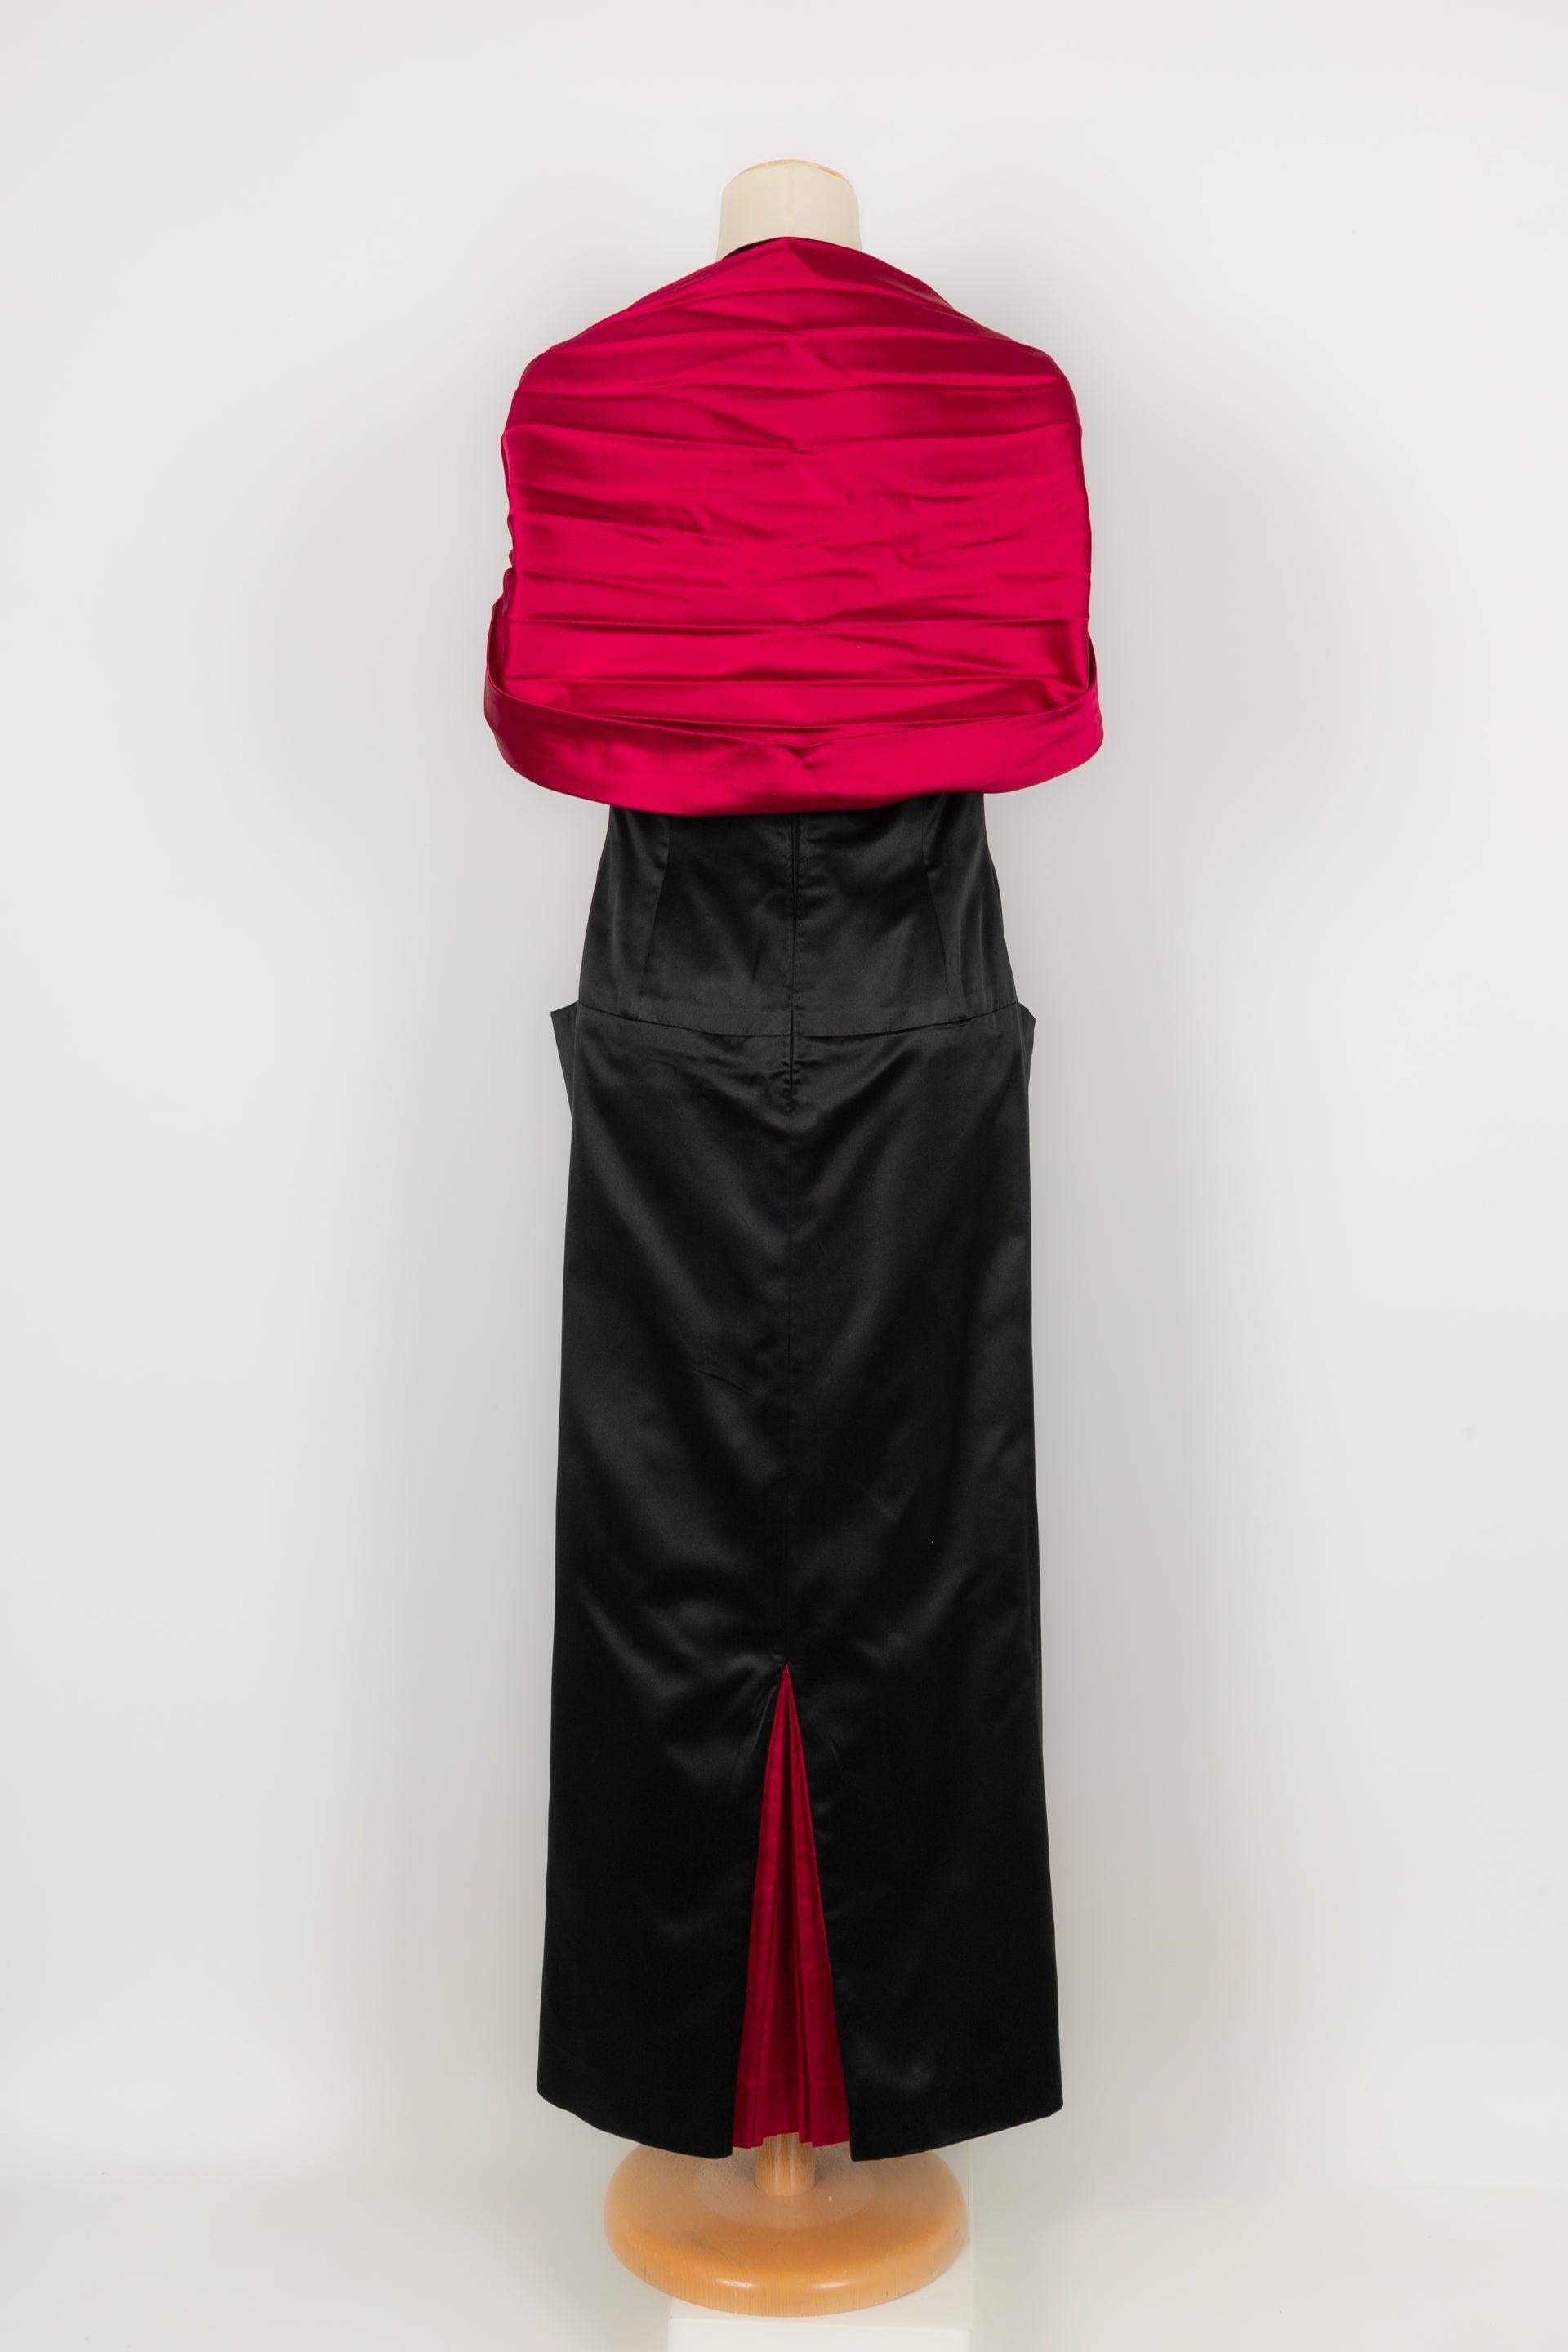 Christian Dior Red and Black Silk Satin Long Dress For Sale 4